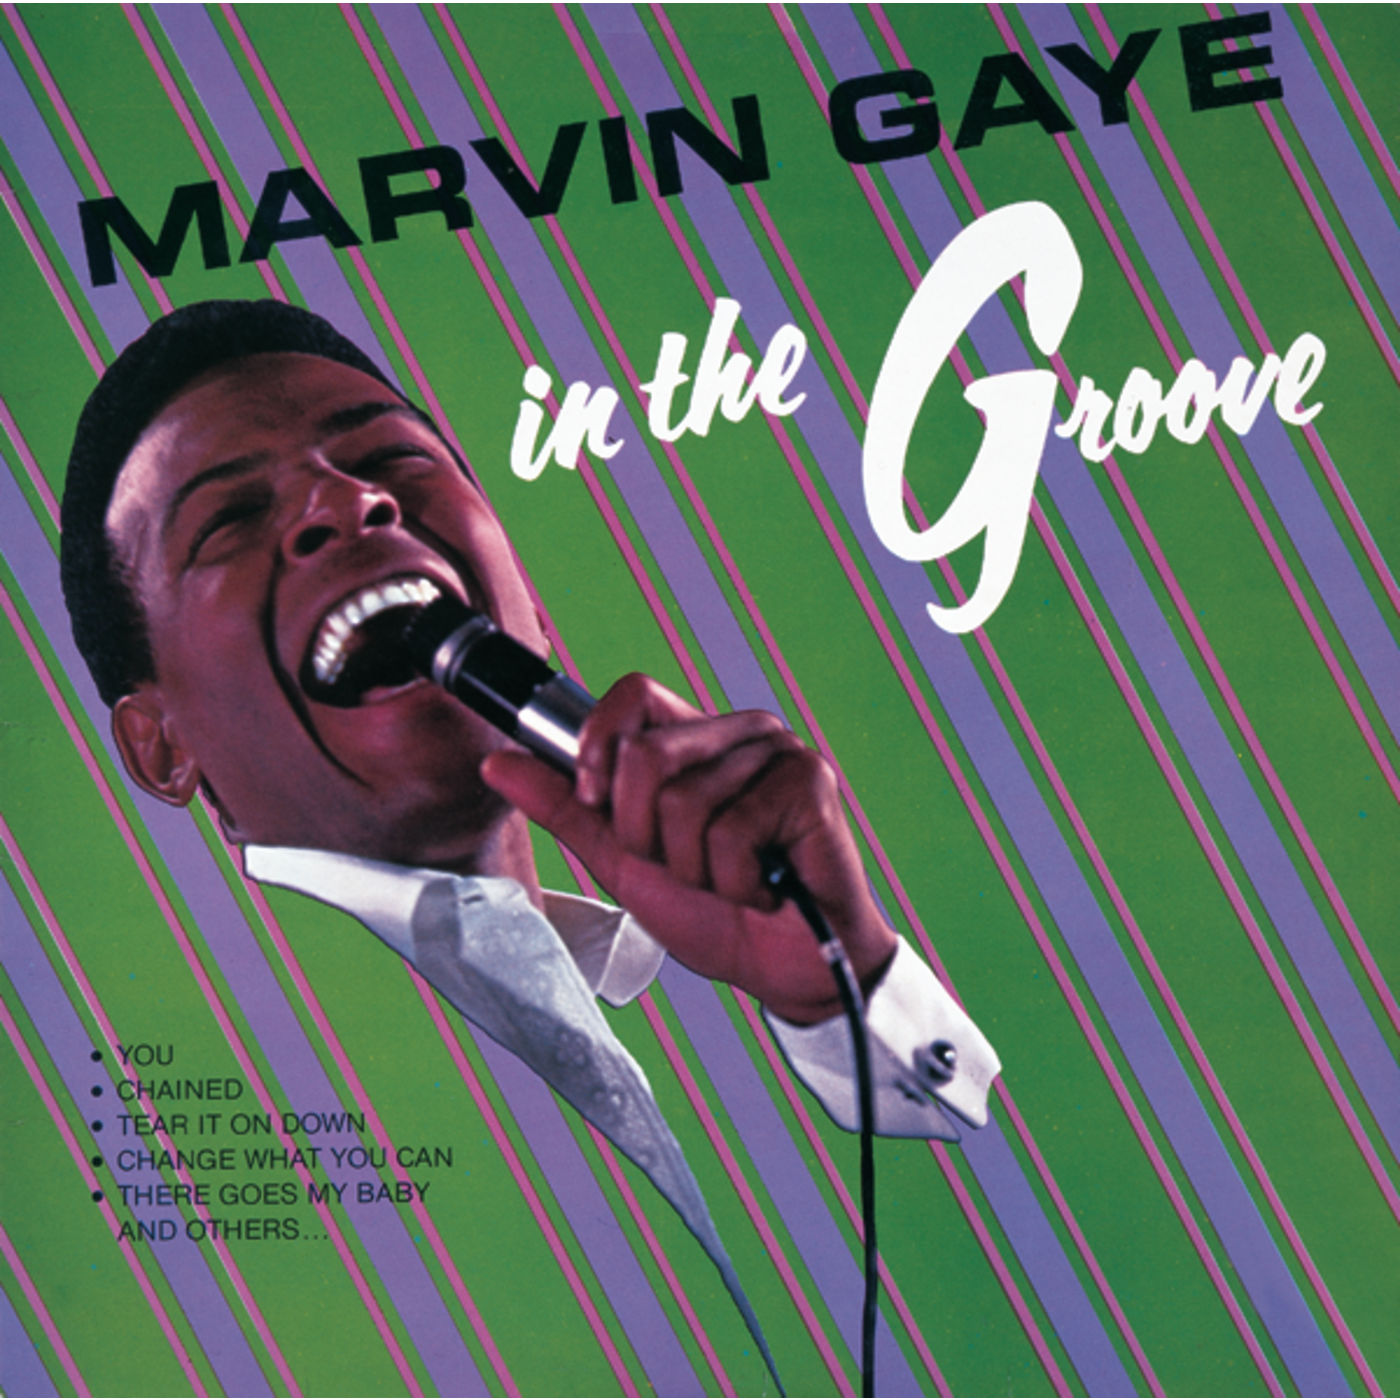 Marvin Gaye - In The Groove (1968/2021) [FLAC 24bit/192kHz]